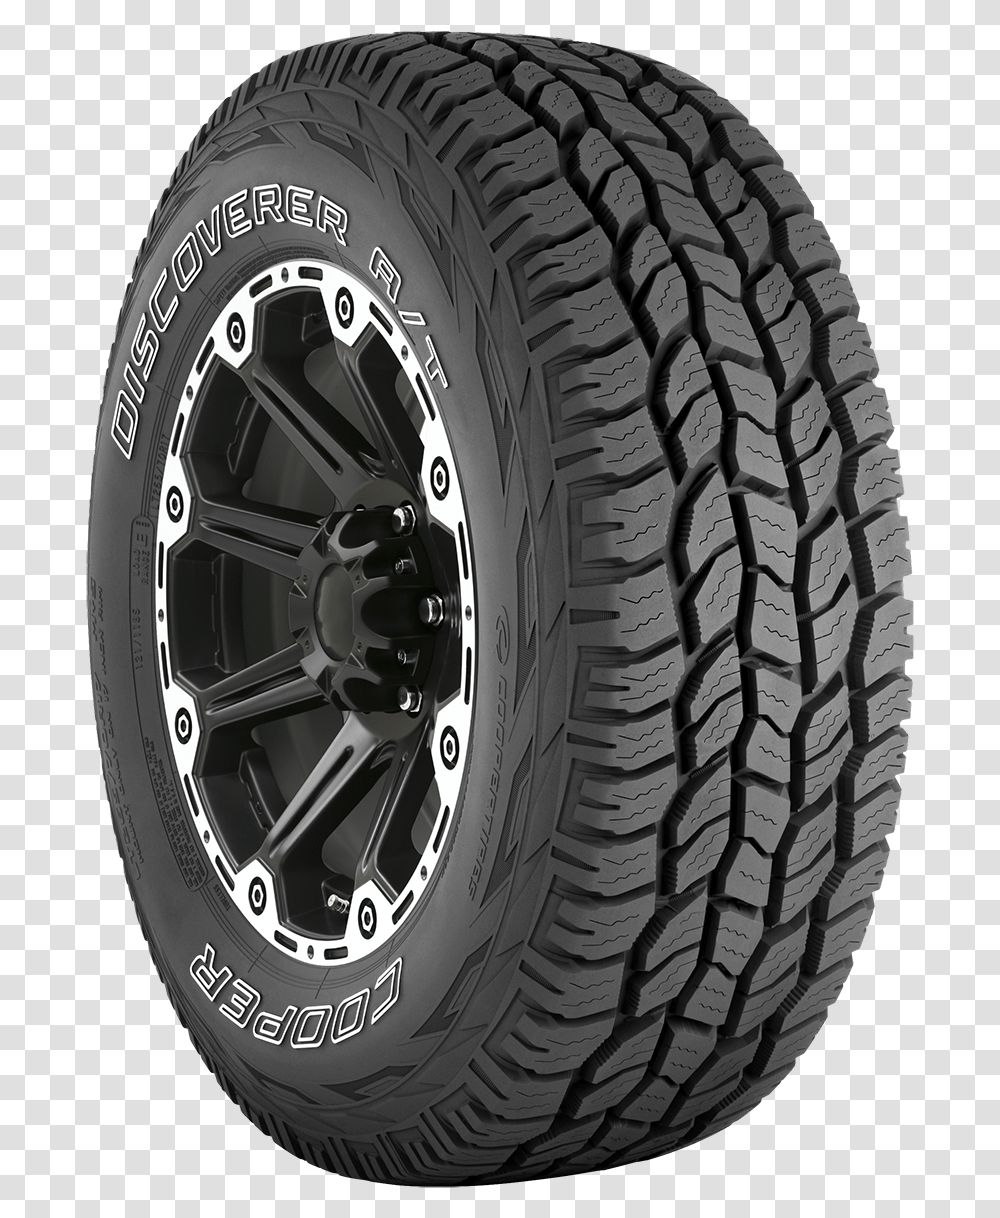 Tire Clipart White Wall Cooper Adventurer Tires, Car Wheel, Machine, Clock Tower, Architecture Transparent Png